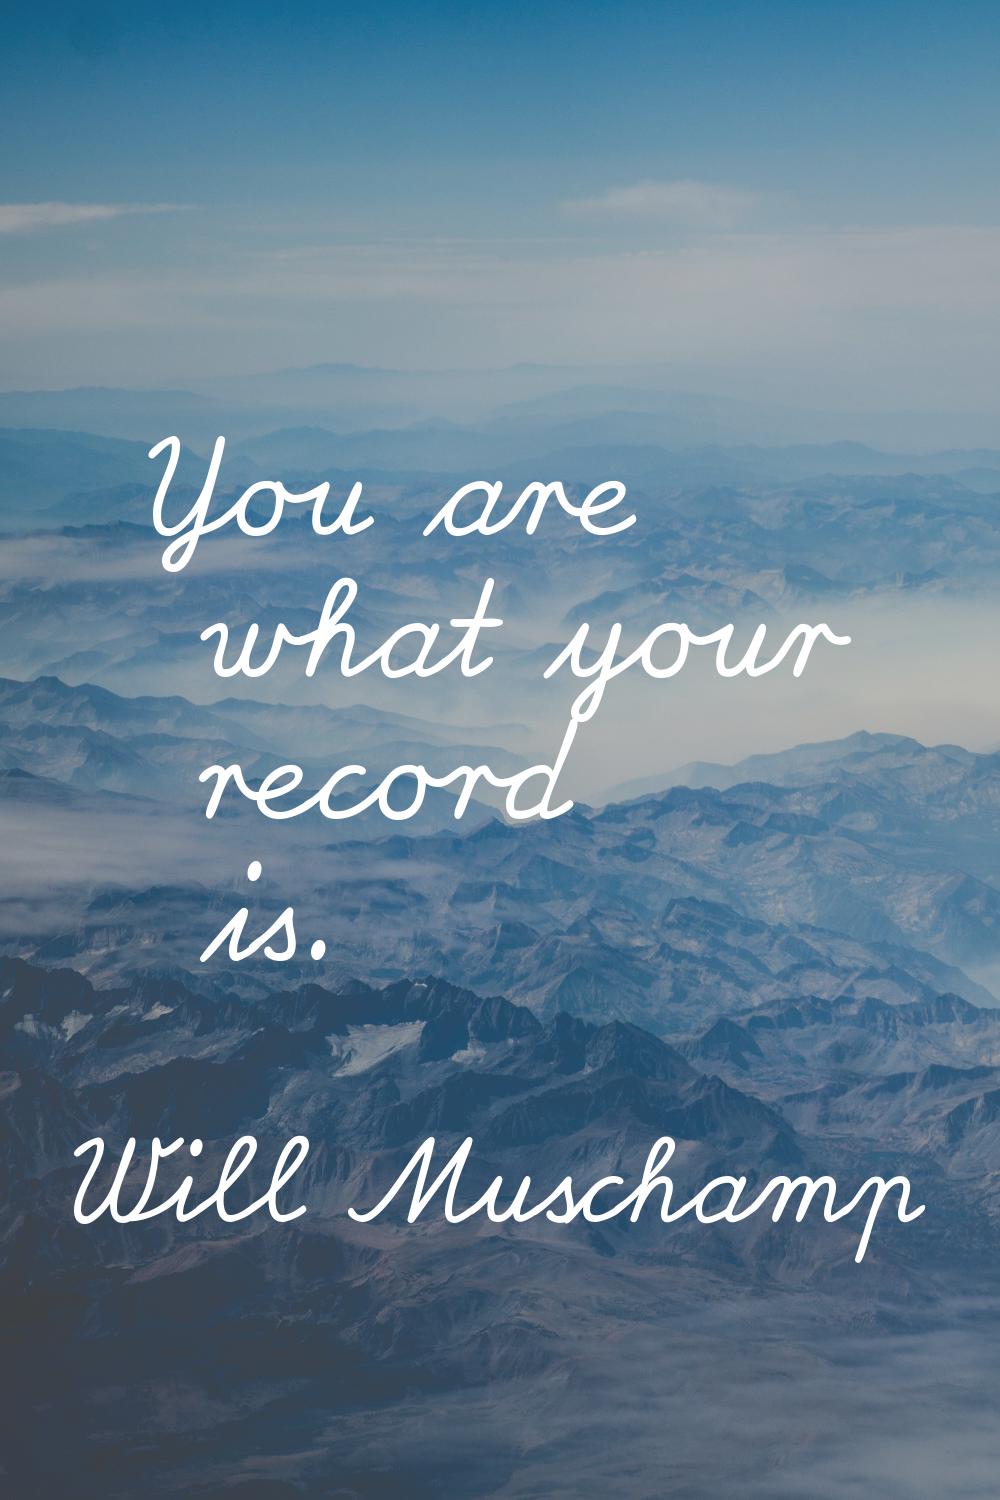 You are what your record is.